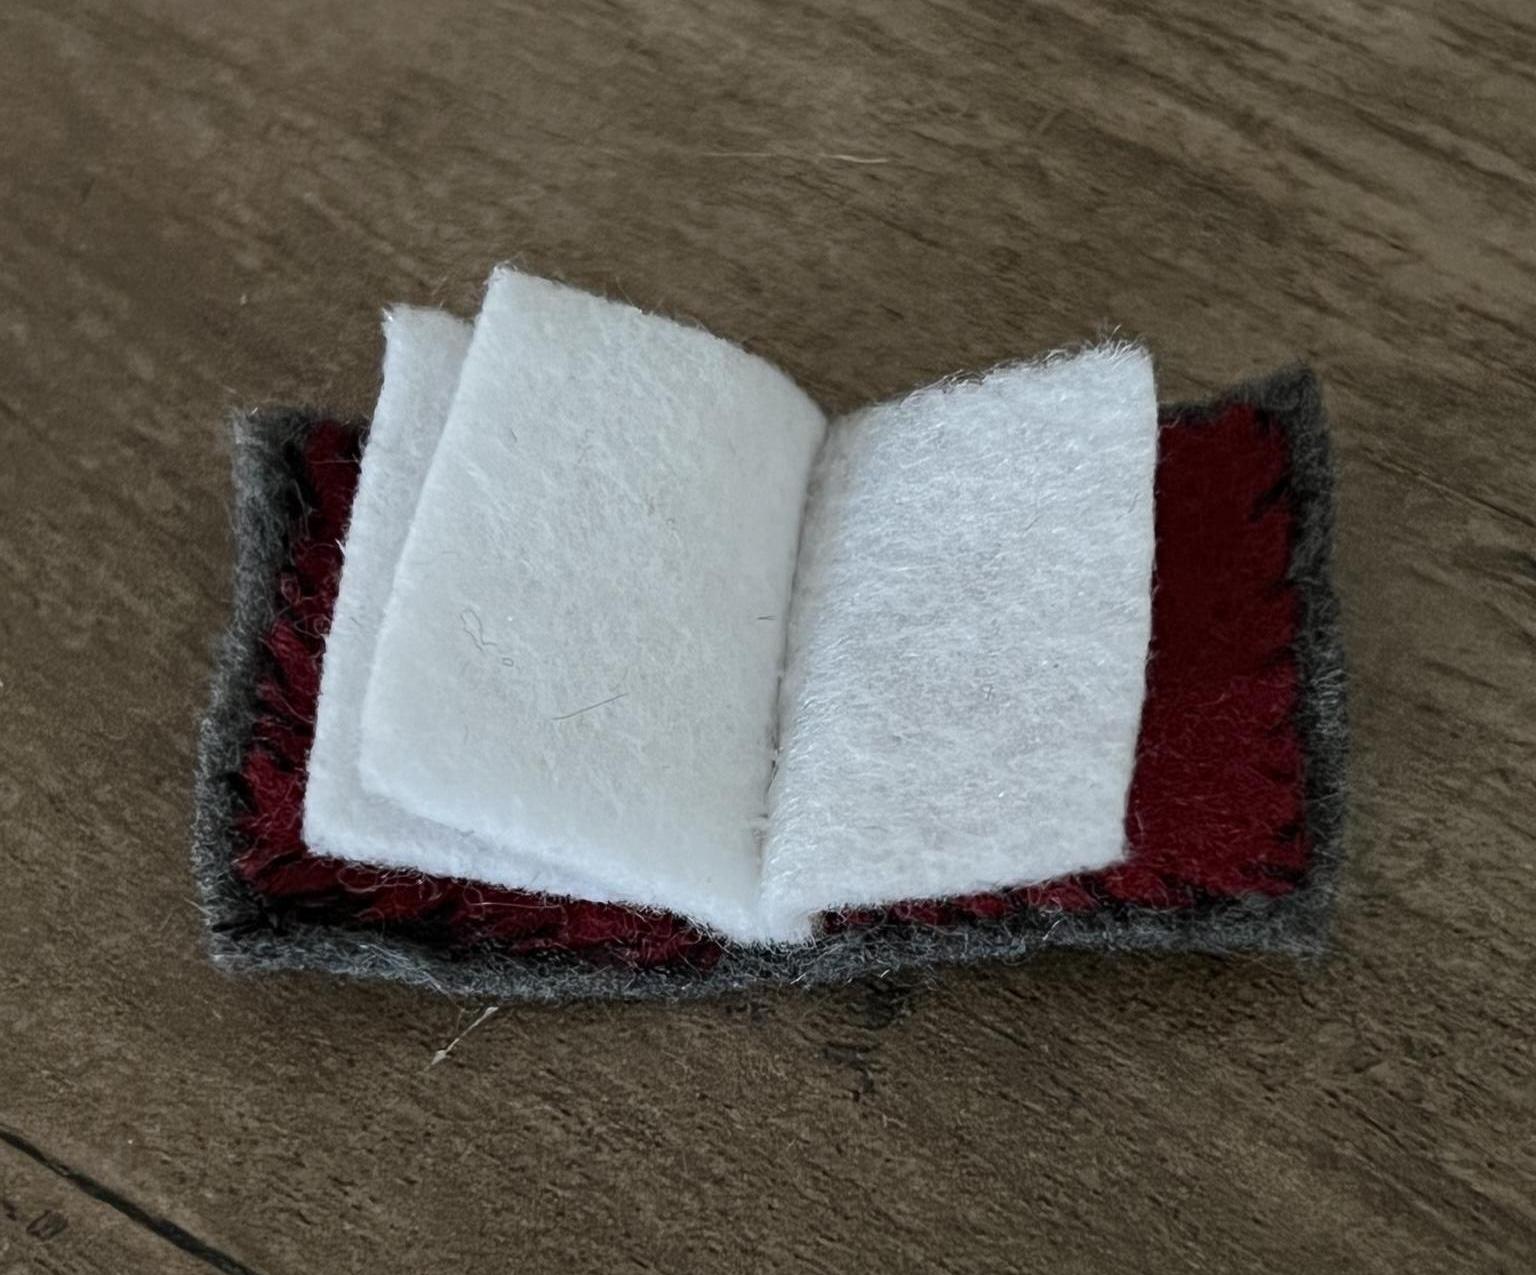 How to Sew a Little Book